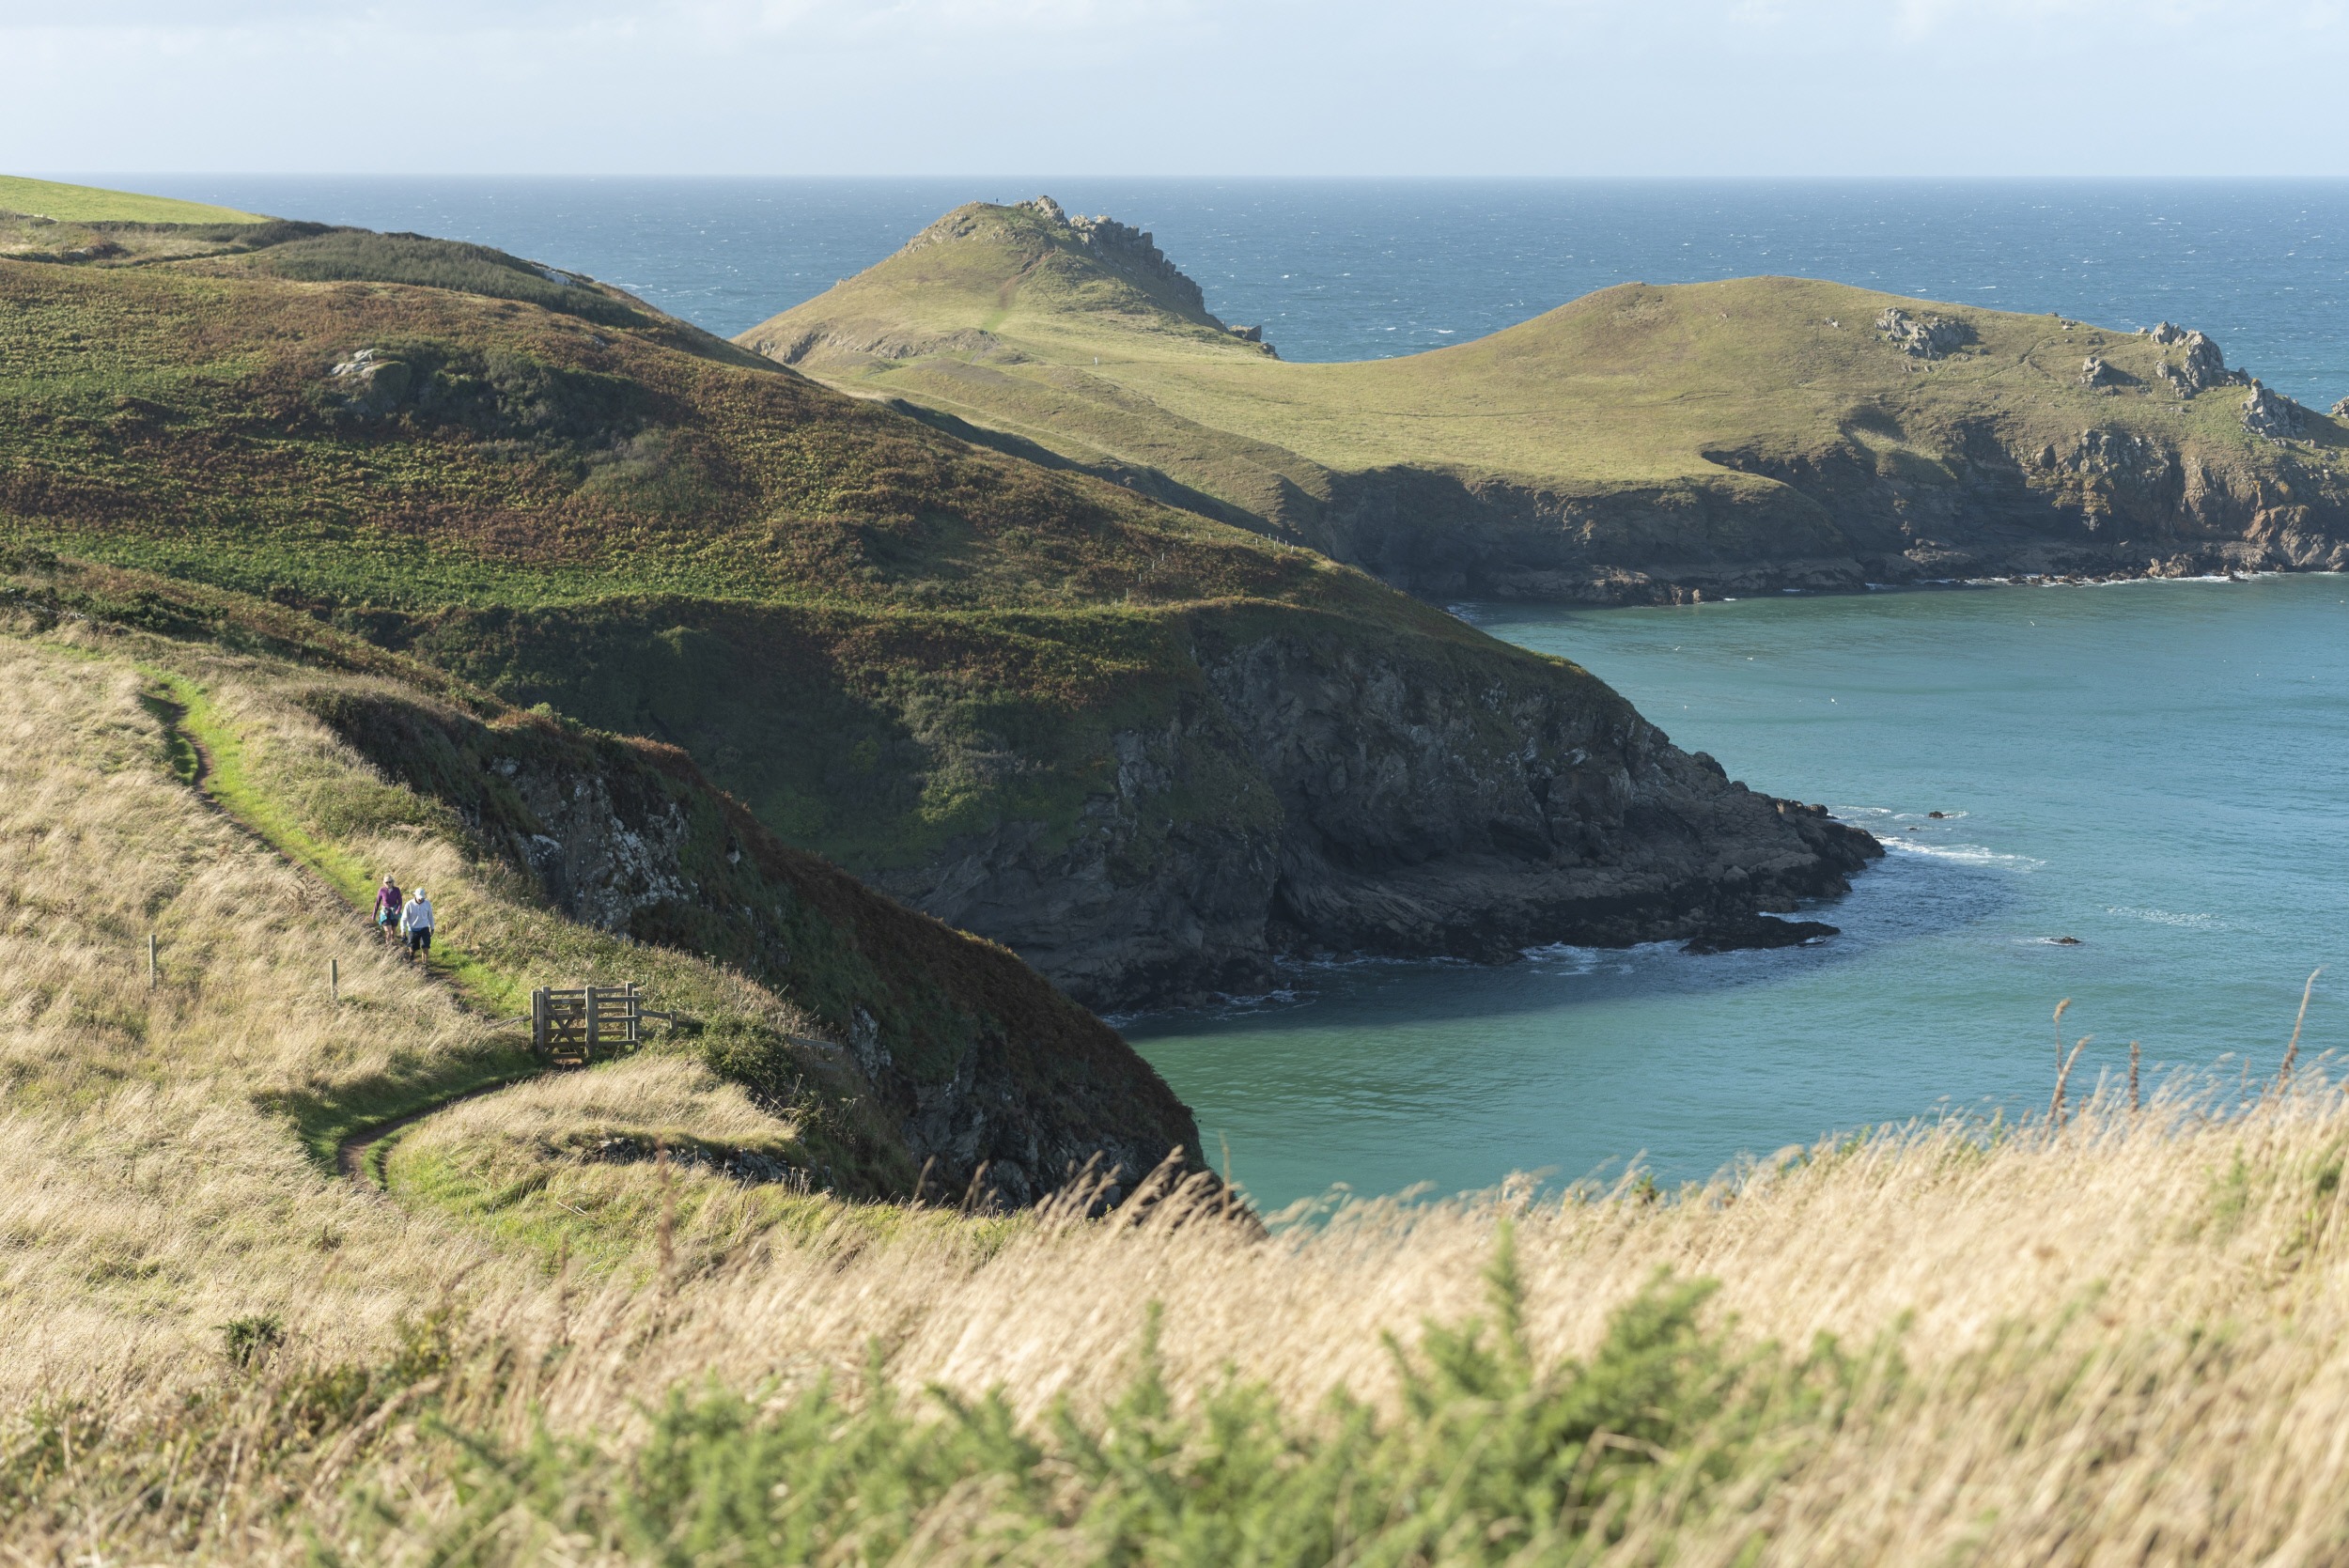 https://cornwall-landscape.org/wp-content/uploads/2023/11/View-towards-the-Rumps-at-Pentire-headland_National-Trust.jpg